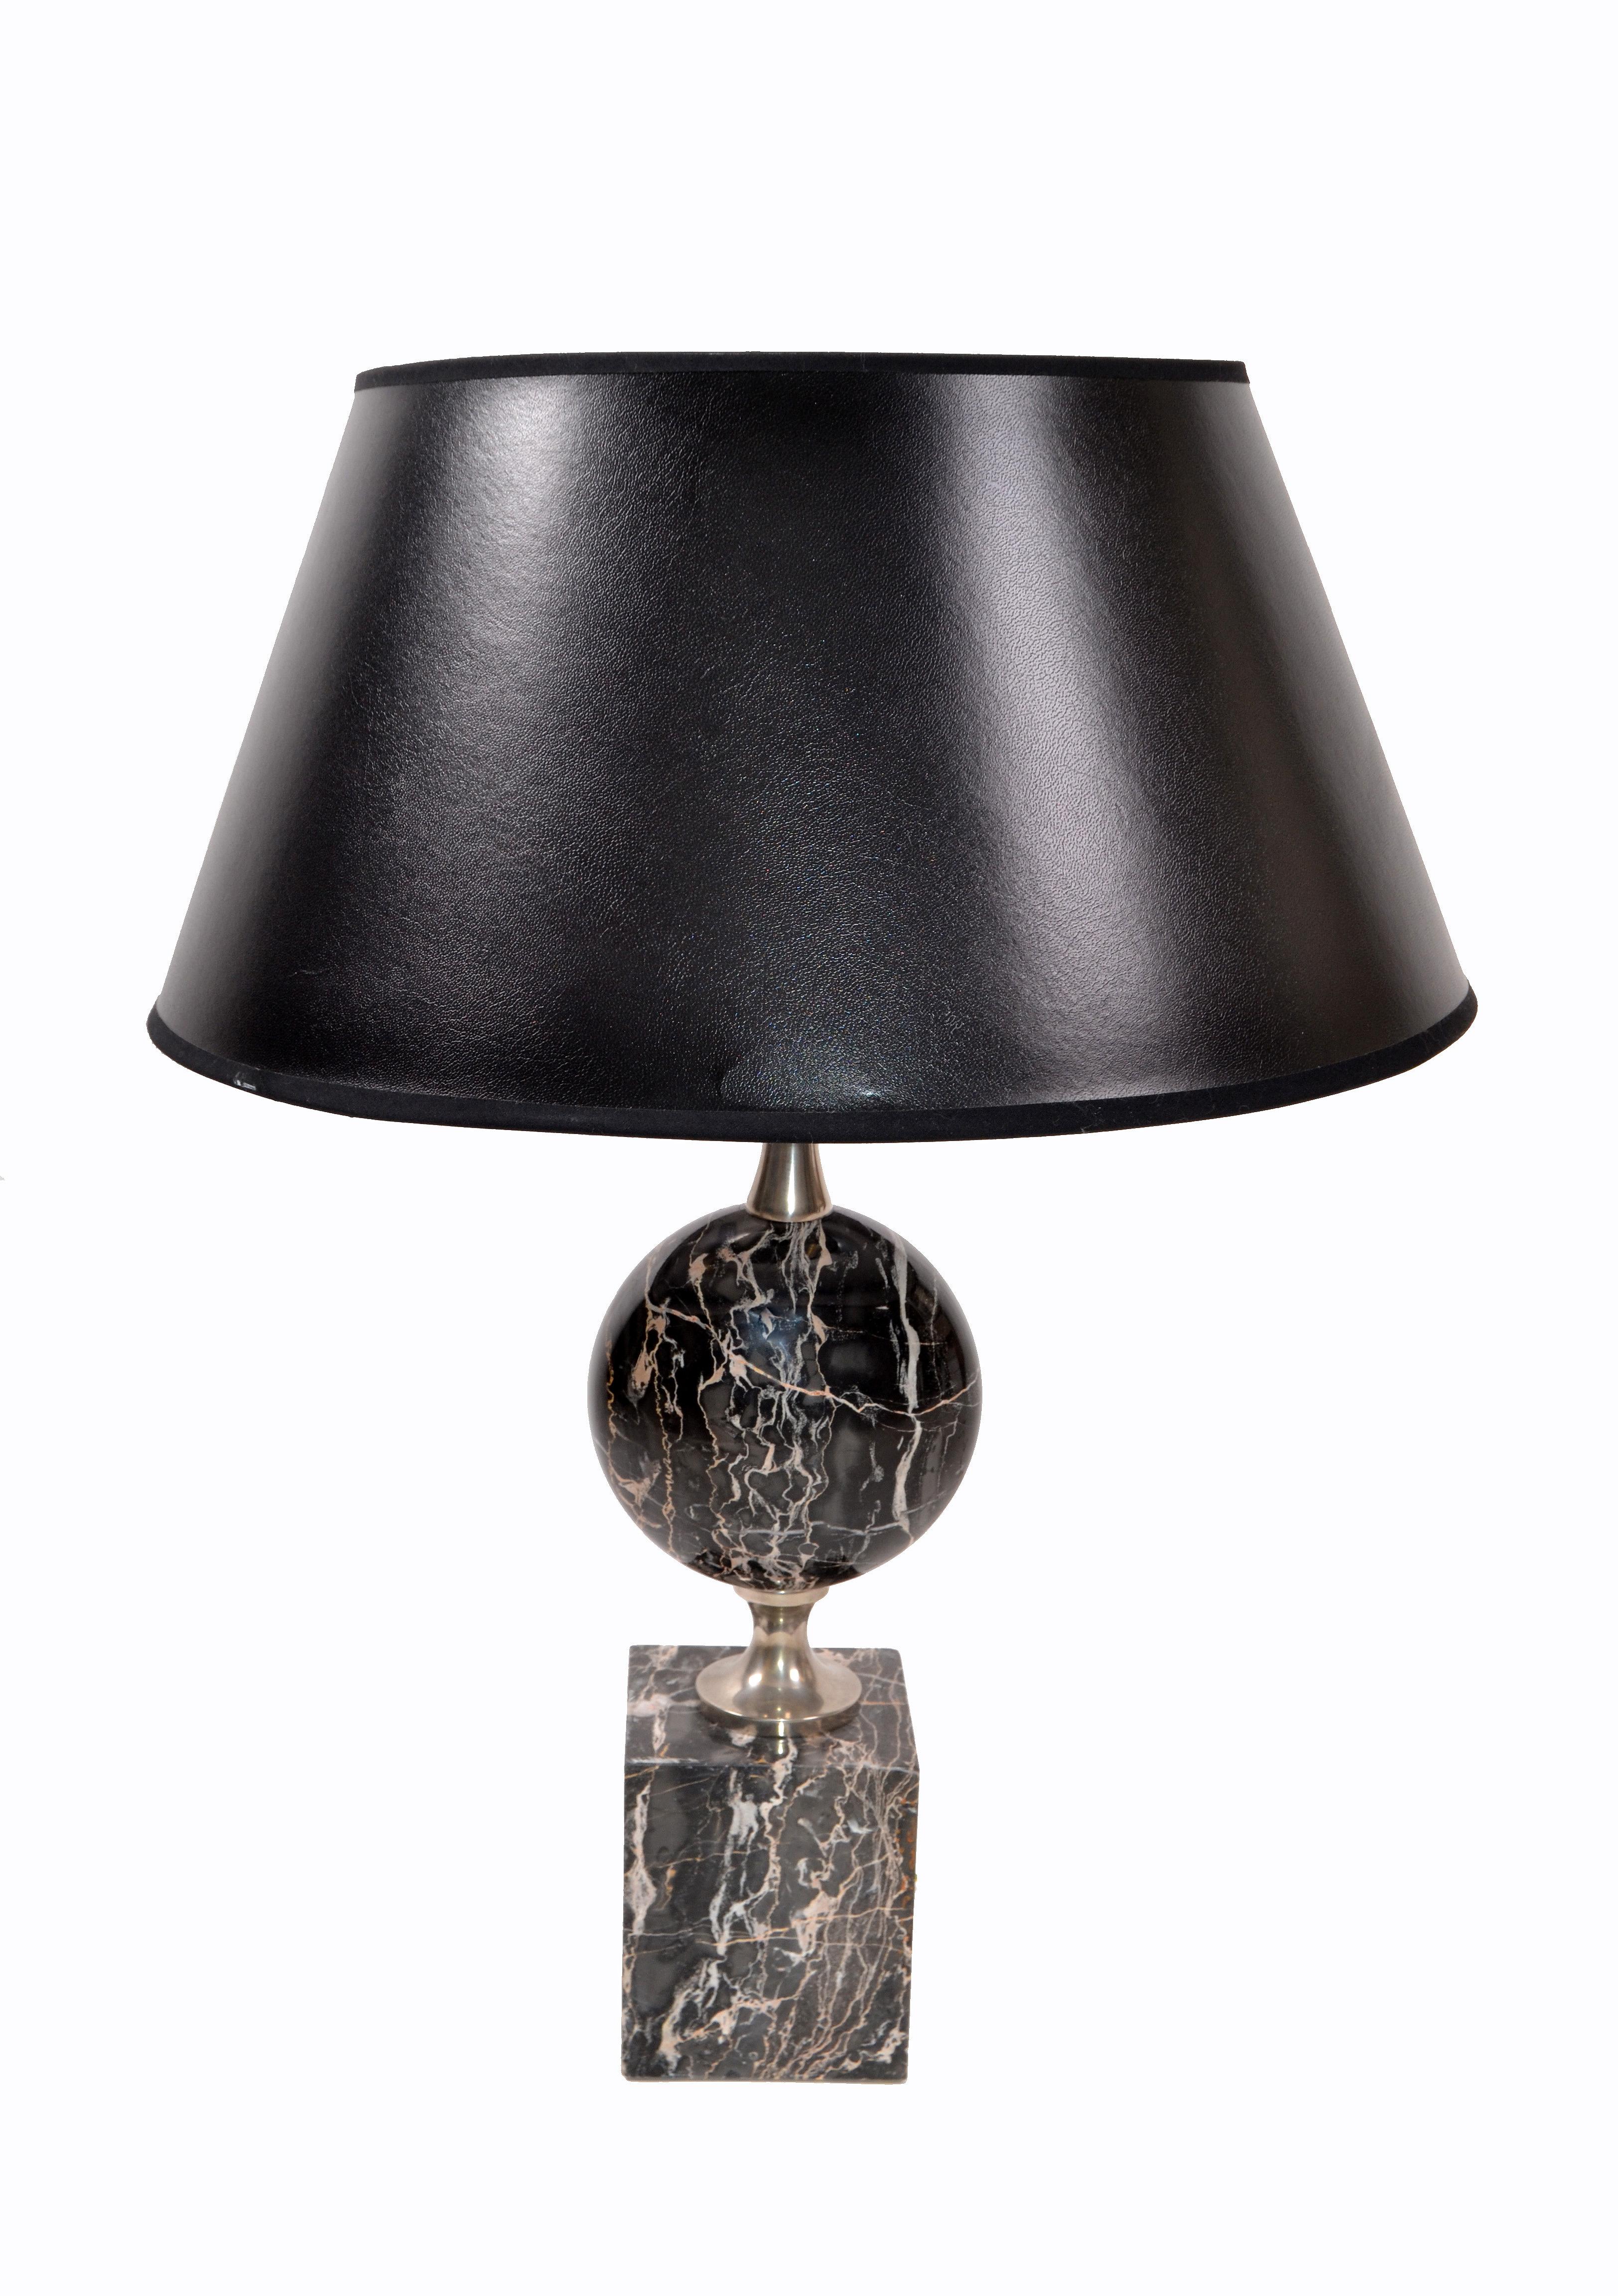 Maison Barbier French Marble and Chrome Table Lamp, 1960 For Sale 1